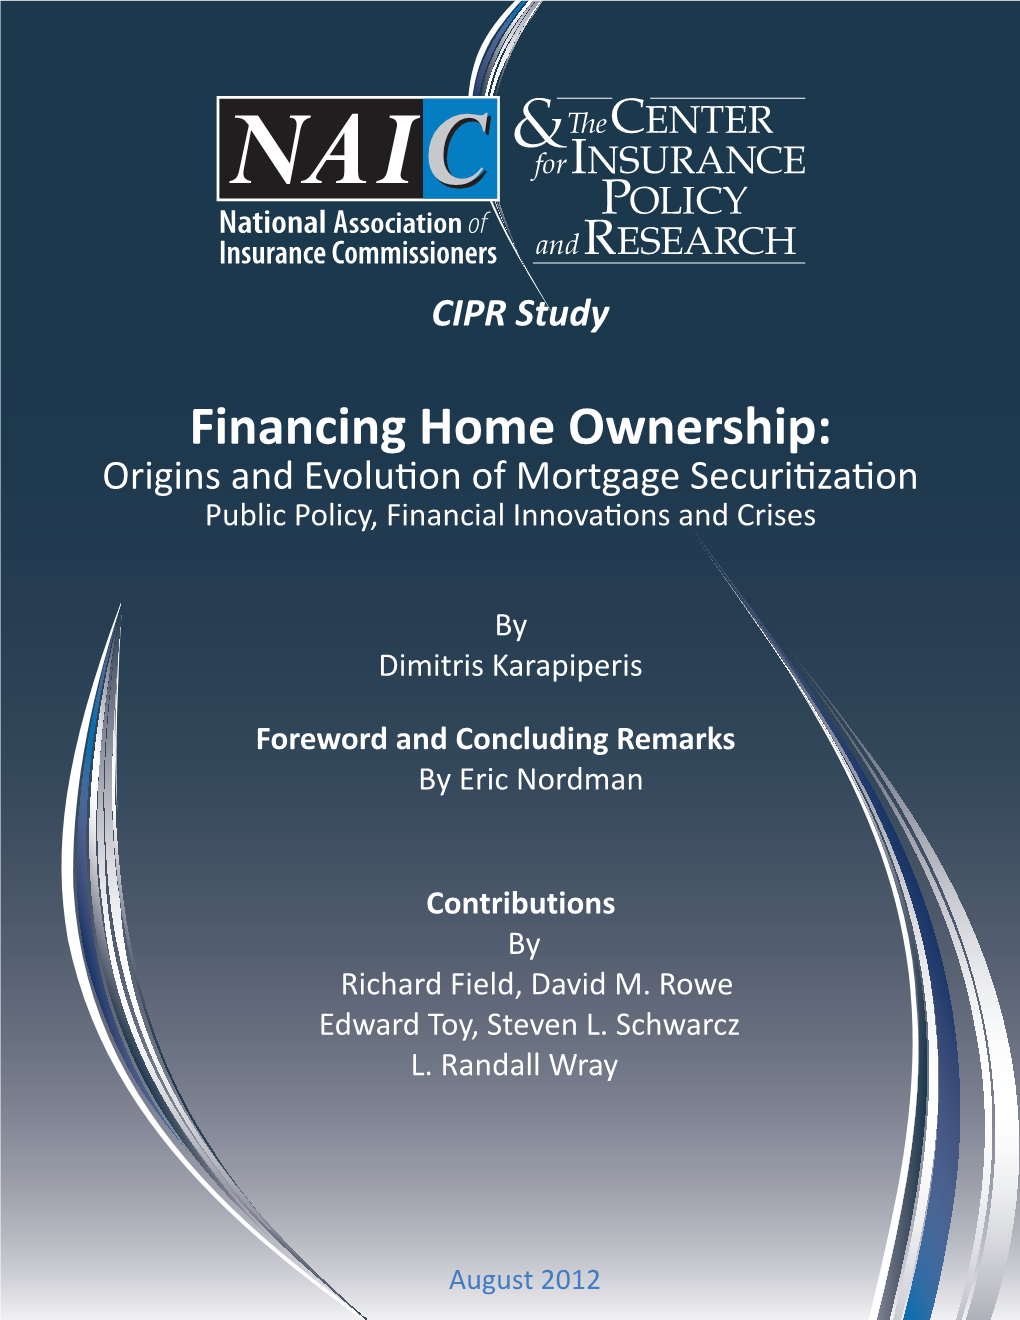 Financing Home Ownership: Origins and Evolution of Mortgage Securitization Public Policy, Financial Innovations and Crises